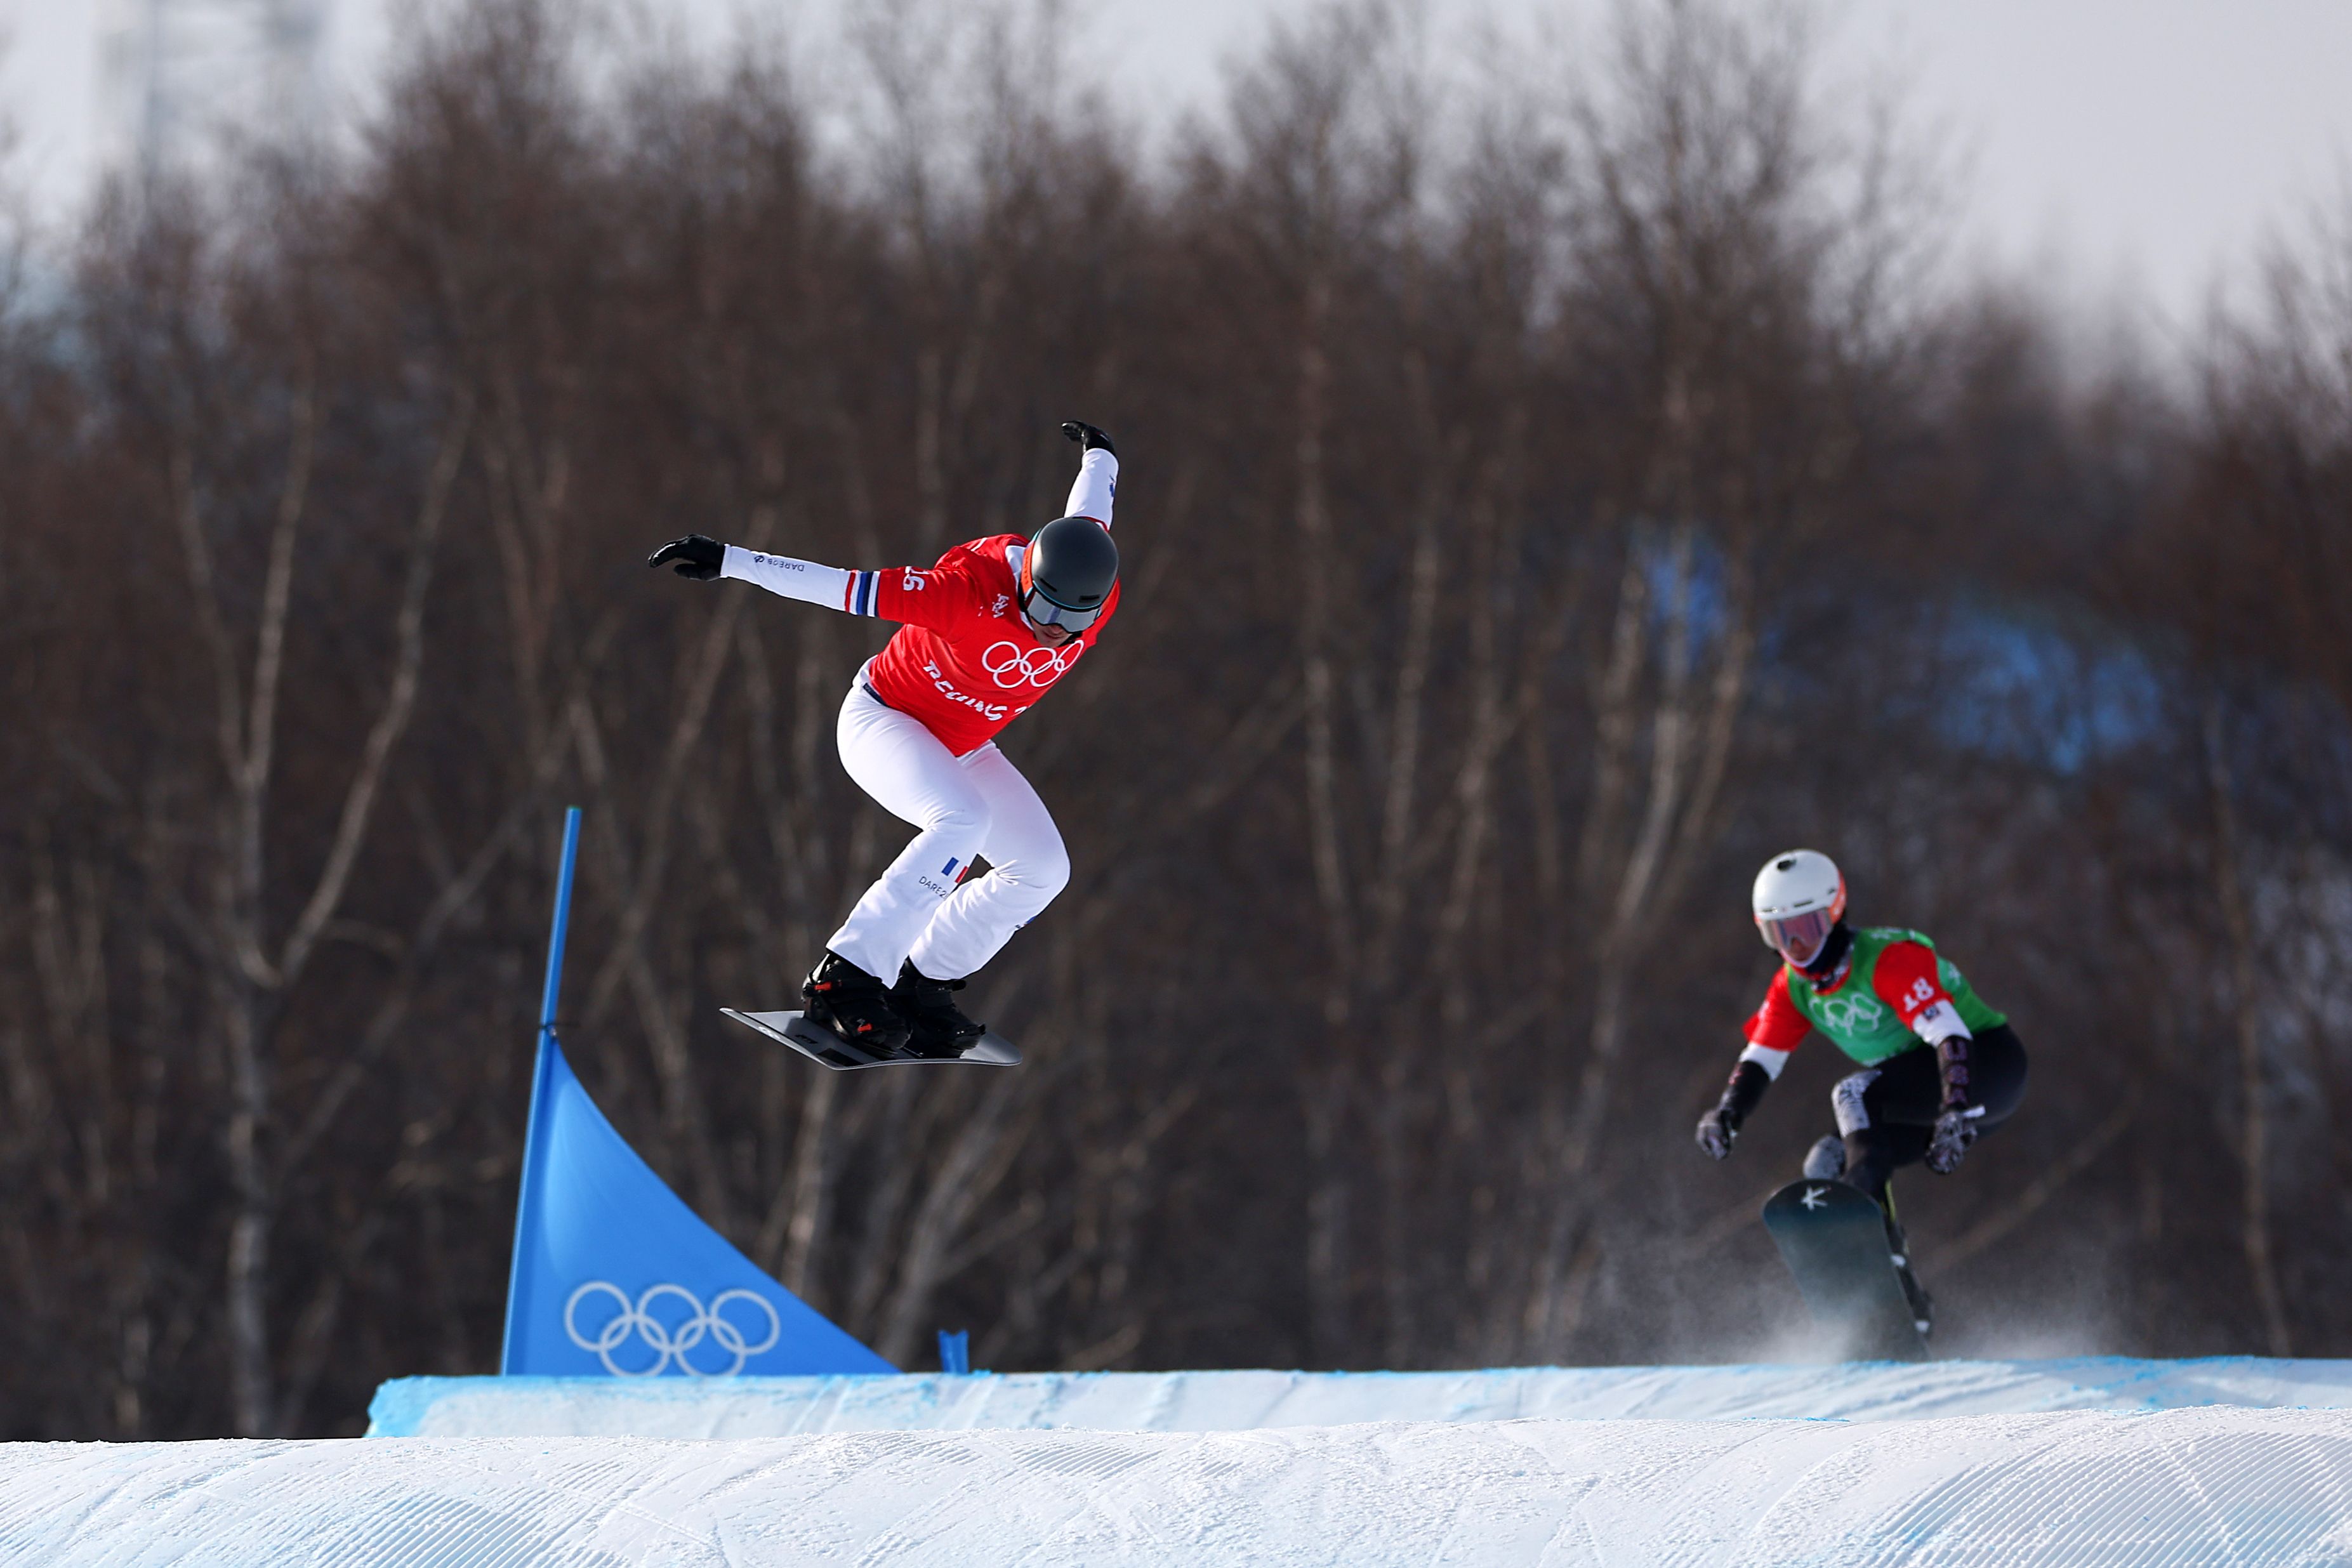 Merlin Surget of Team France competes during the Men's Snowboard Cross Semifinals on Day 6 of the Winter Olympics at Genting Snow Park on February 10, 2022 in Zhangjiakou, China. 